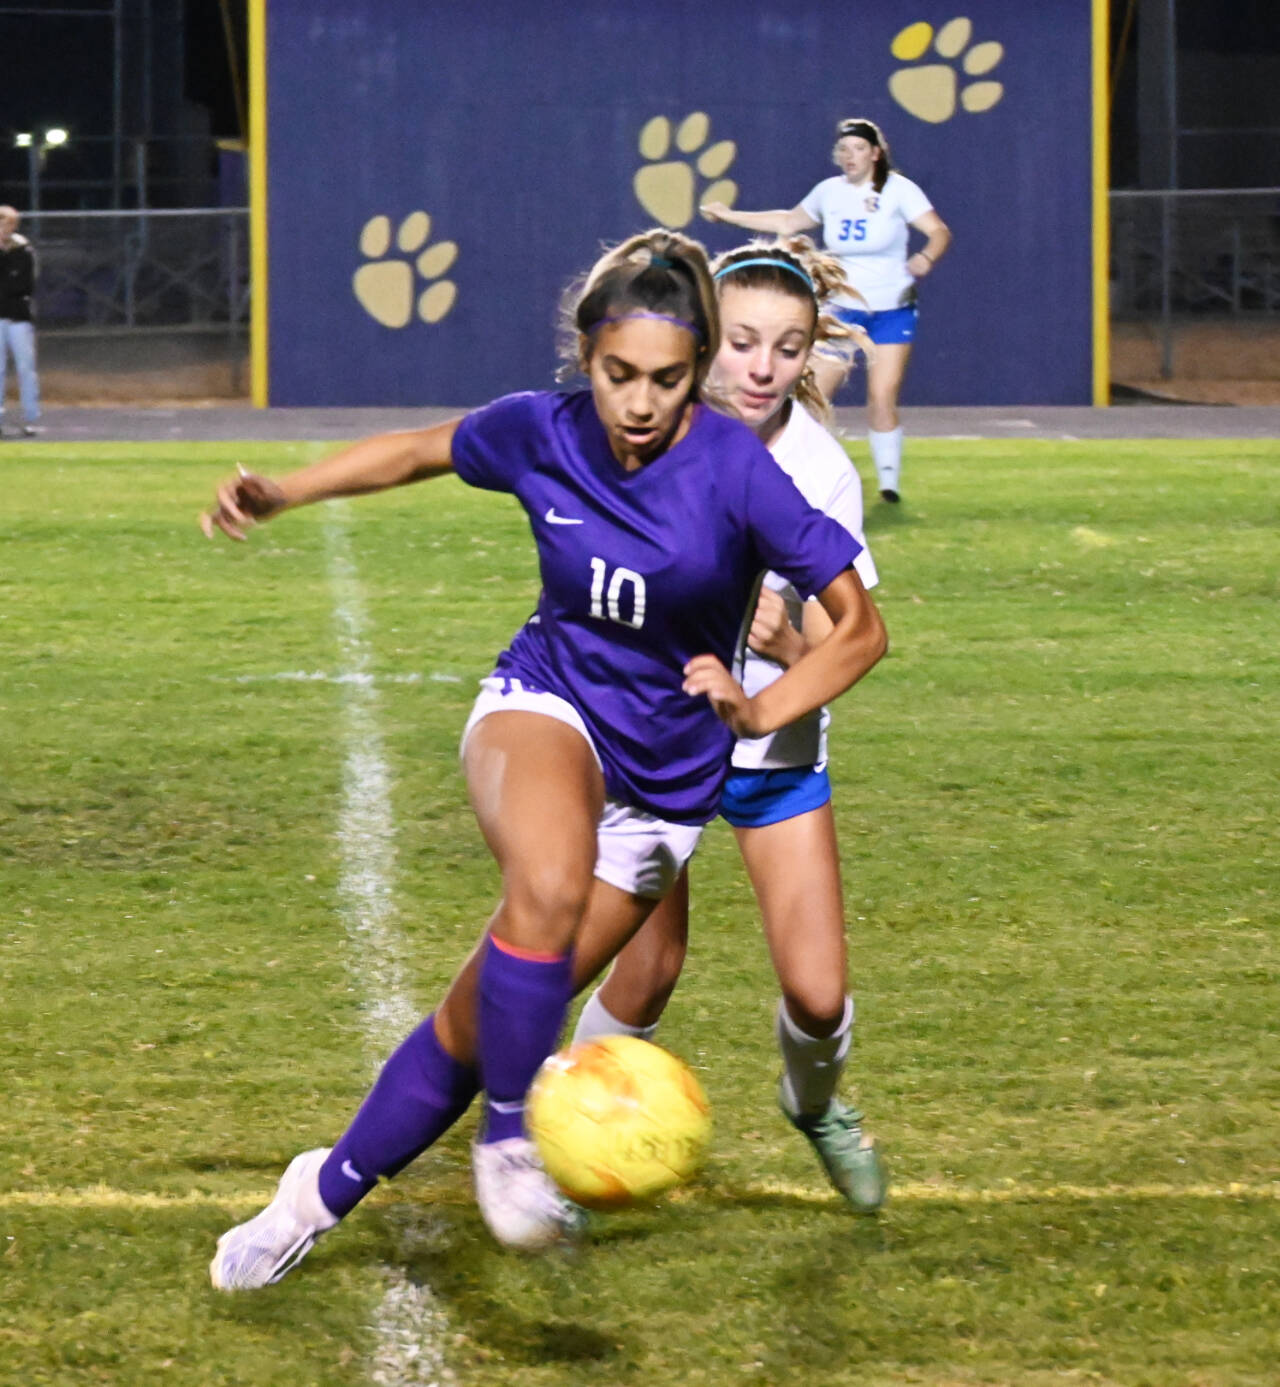 Sequim Gazette photos by Michael Dashiell
Sequim’s Jennyfer Gomez vies for the ball with Bremerton’s Melanie Uhrich in the Wolves’ 4-0 win in Sequim on Sept. 29.